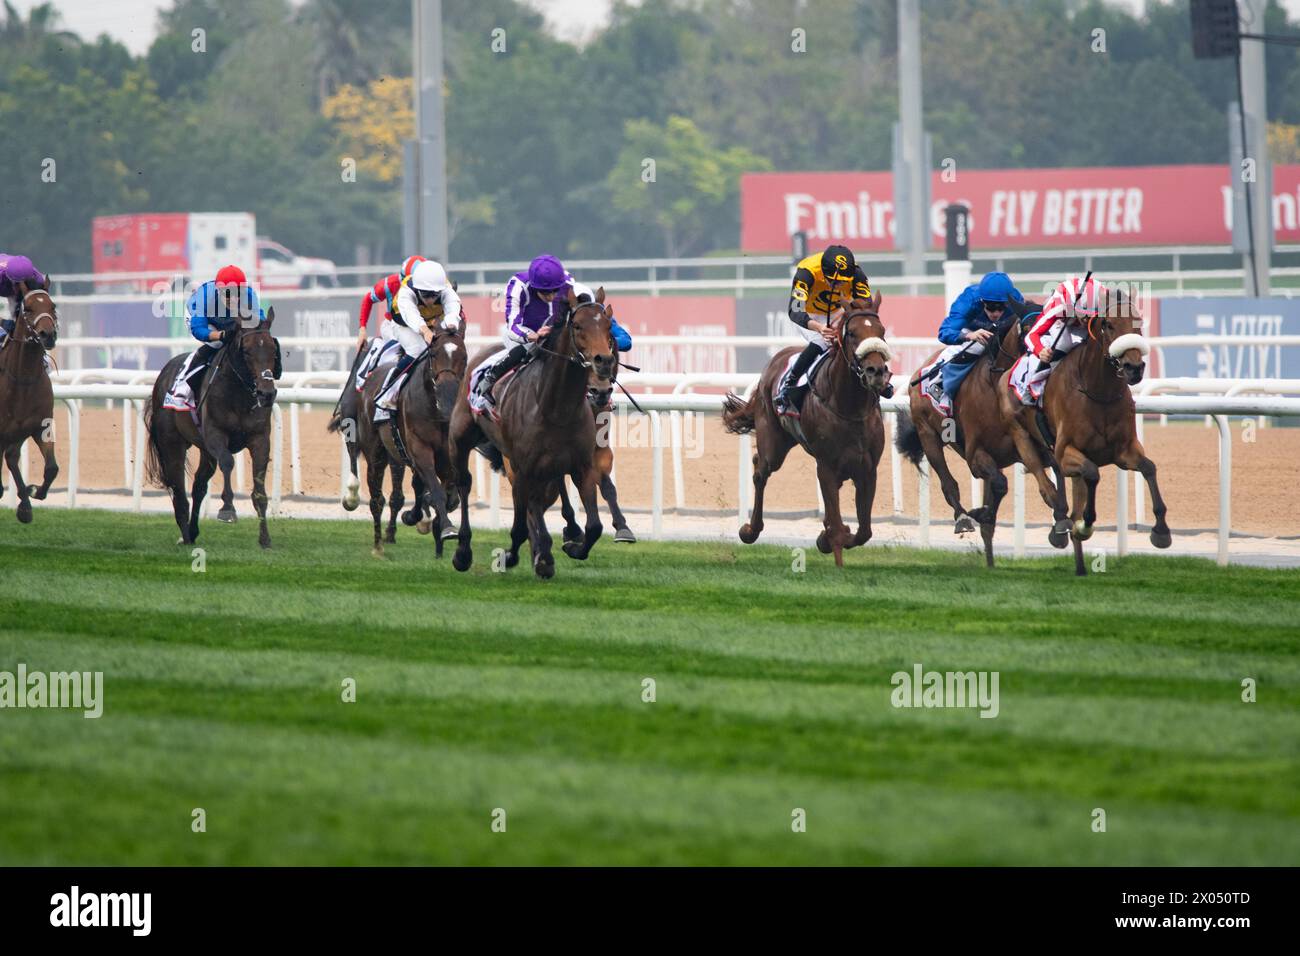 Tower of London and Ryan Moore win the 2024 renewal of the G2 Dubai Gold Cup for trainer Aidan O'Brien, 30/03/24. Credit JTW Equine Images / Alamy. Stock Photo